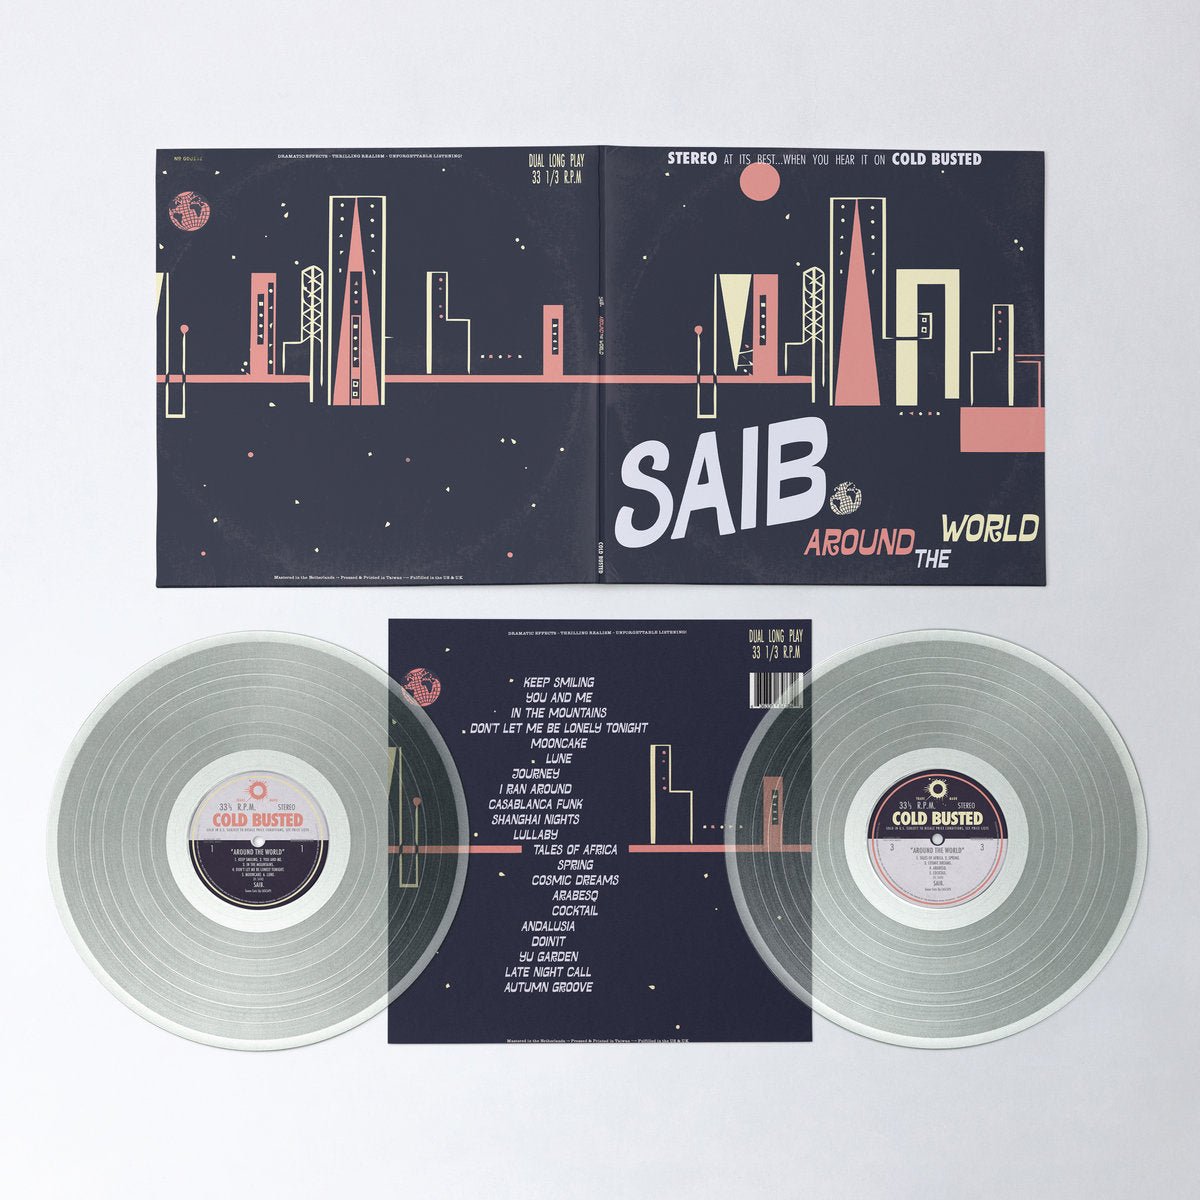 saib. - Around The World (Remastered) - PRE-ORDER: Limited Edition Clear Colored Double 12 Inch Vinyl - COLD BUSTED